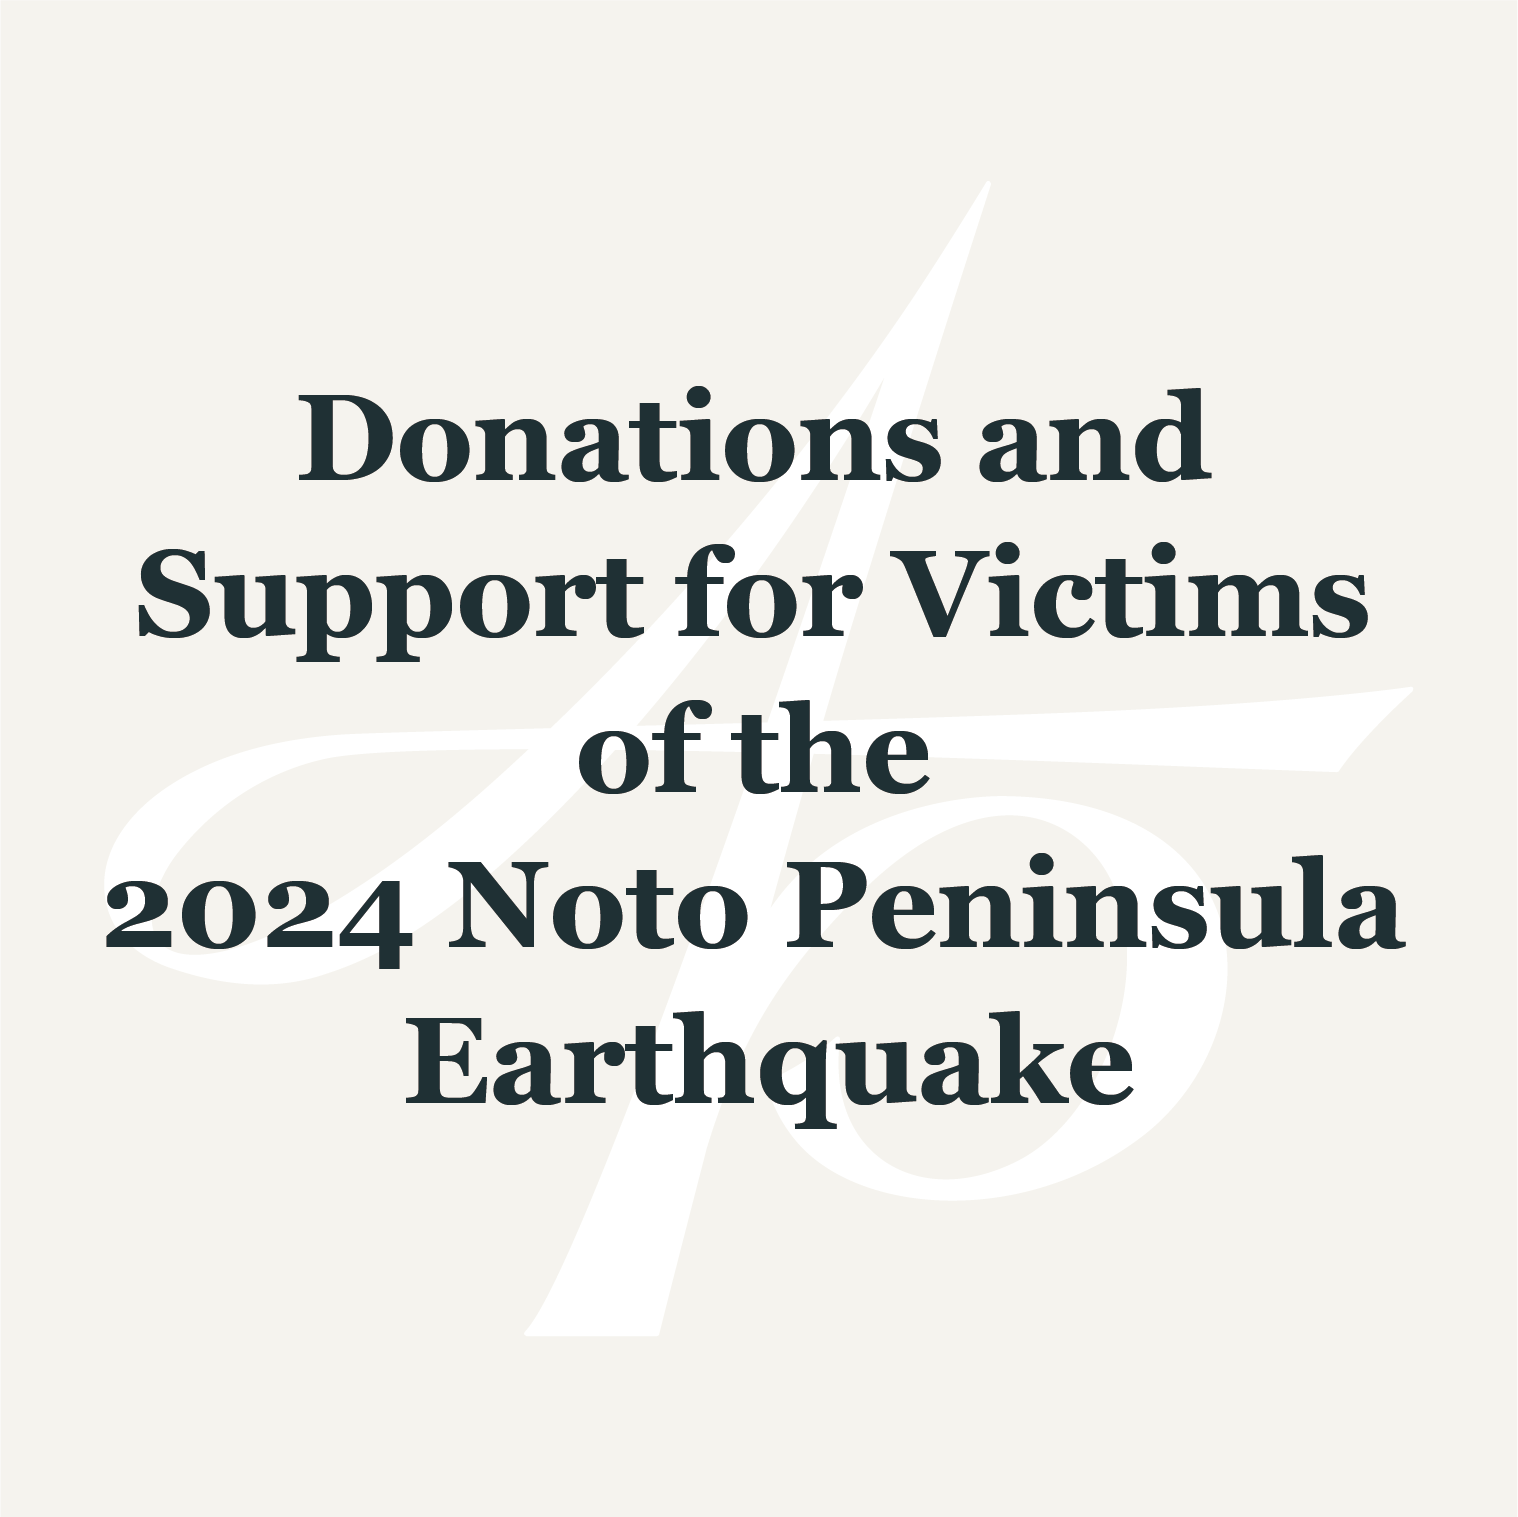 Donations and Support for Victims of the 2024 Noto Peninsula Earthquake